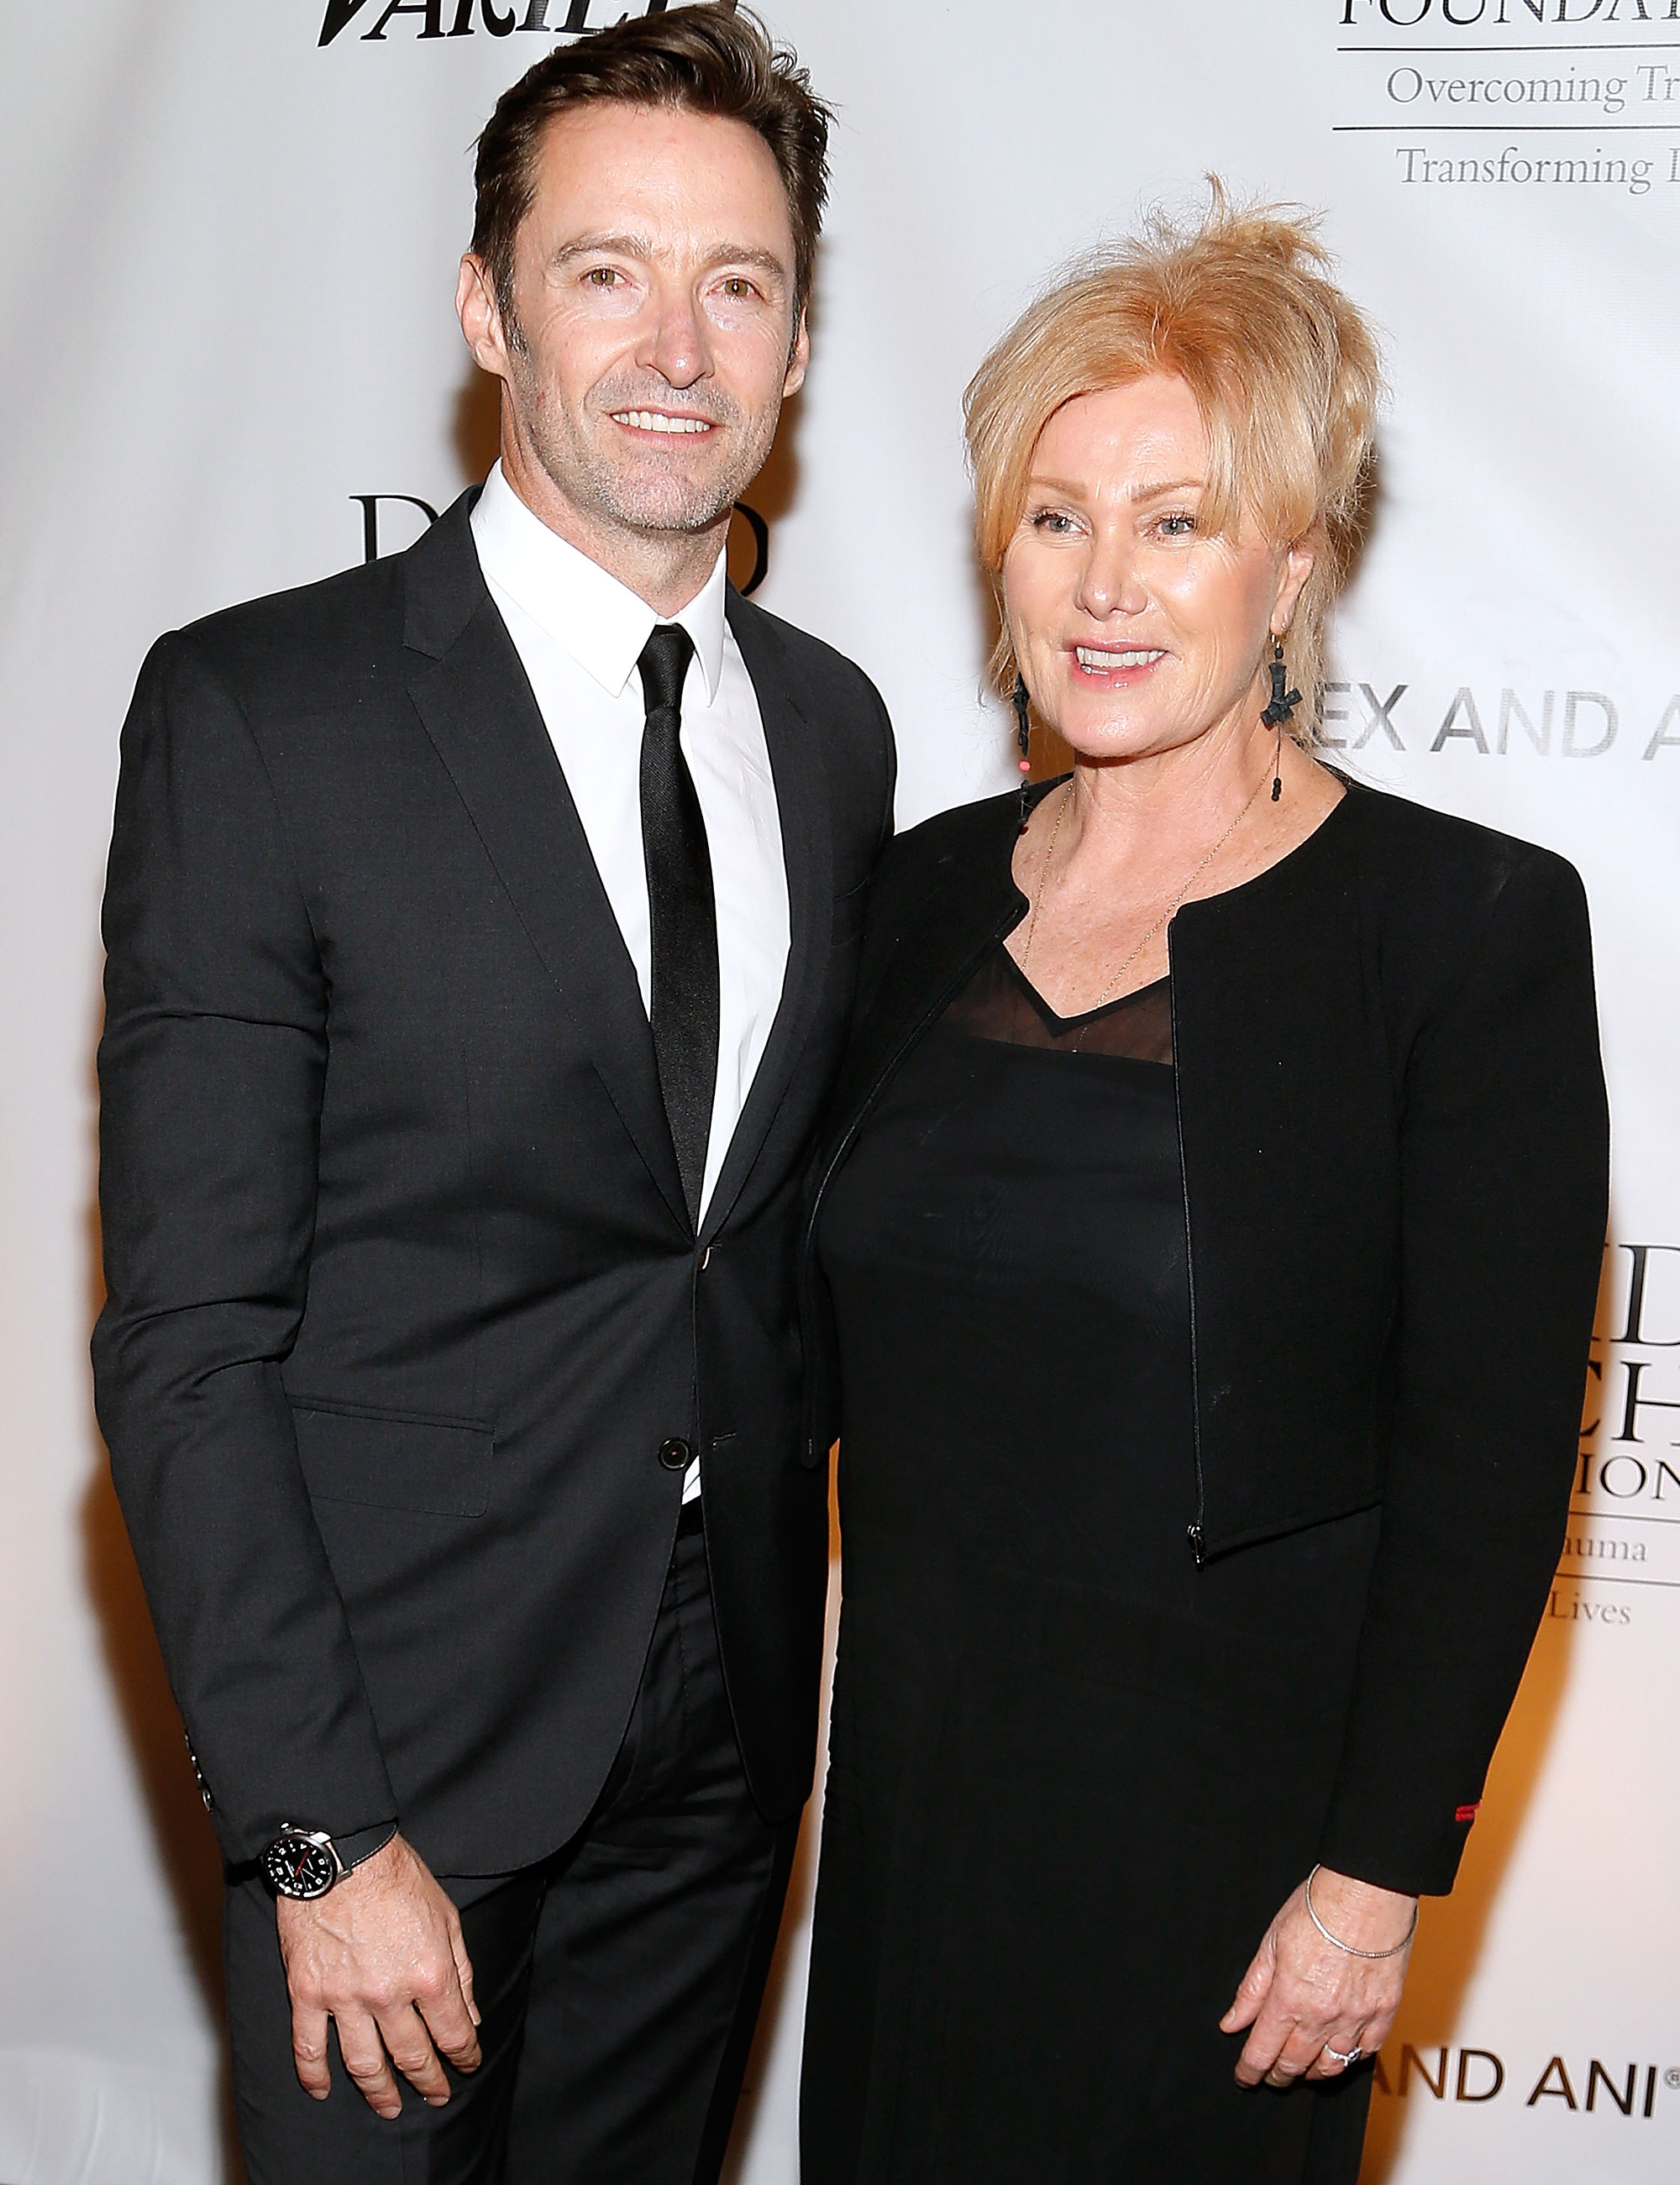 WASHINGTON, DC - JUNE 05:  Hugh Jackman (L) and Deborra-Lee Furness attend the National Night of Laughter and Song event hosted by David Lynch Foundation at the John F. Kennedy Center for the Performing Arts on June 5, 2017 in Washington, DC.  (Photo by Paul Morigi/WireImage) (Paul Morigi&mdash;WireImage)